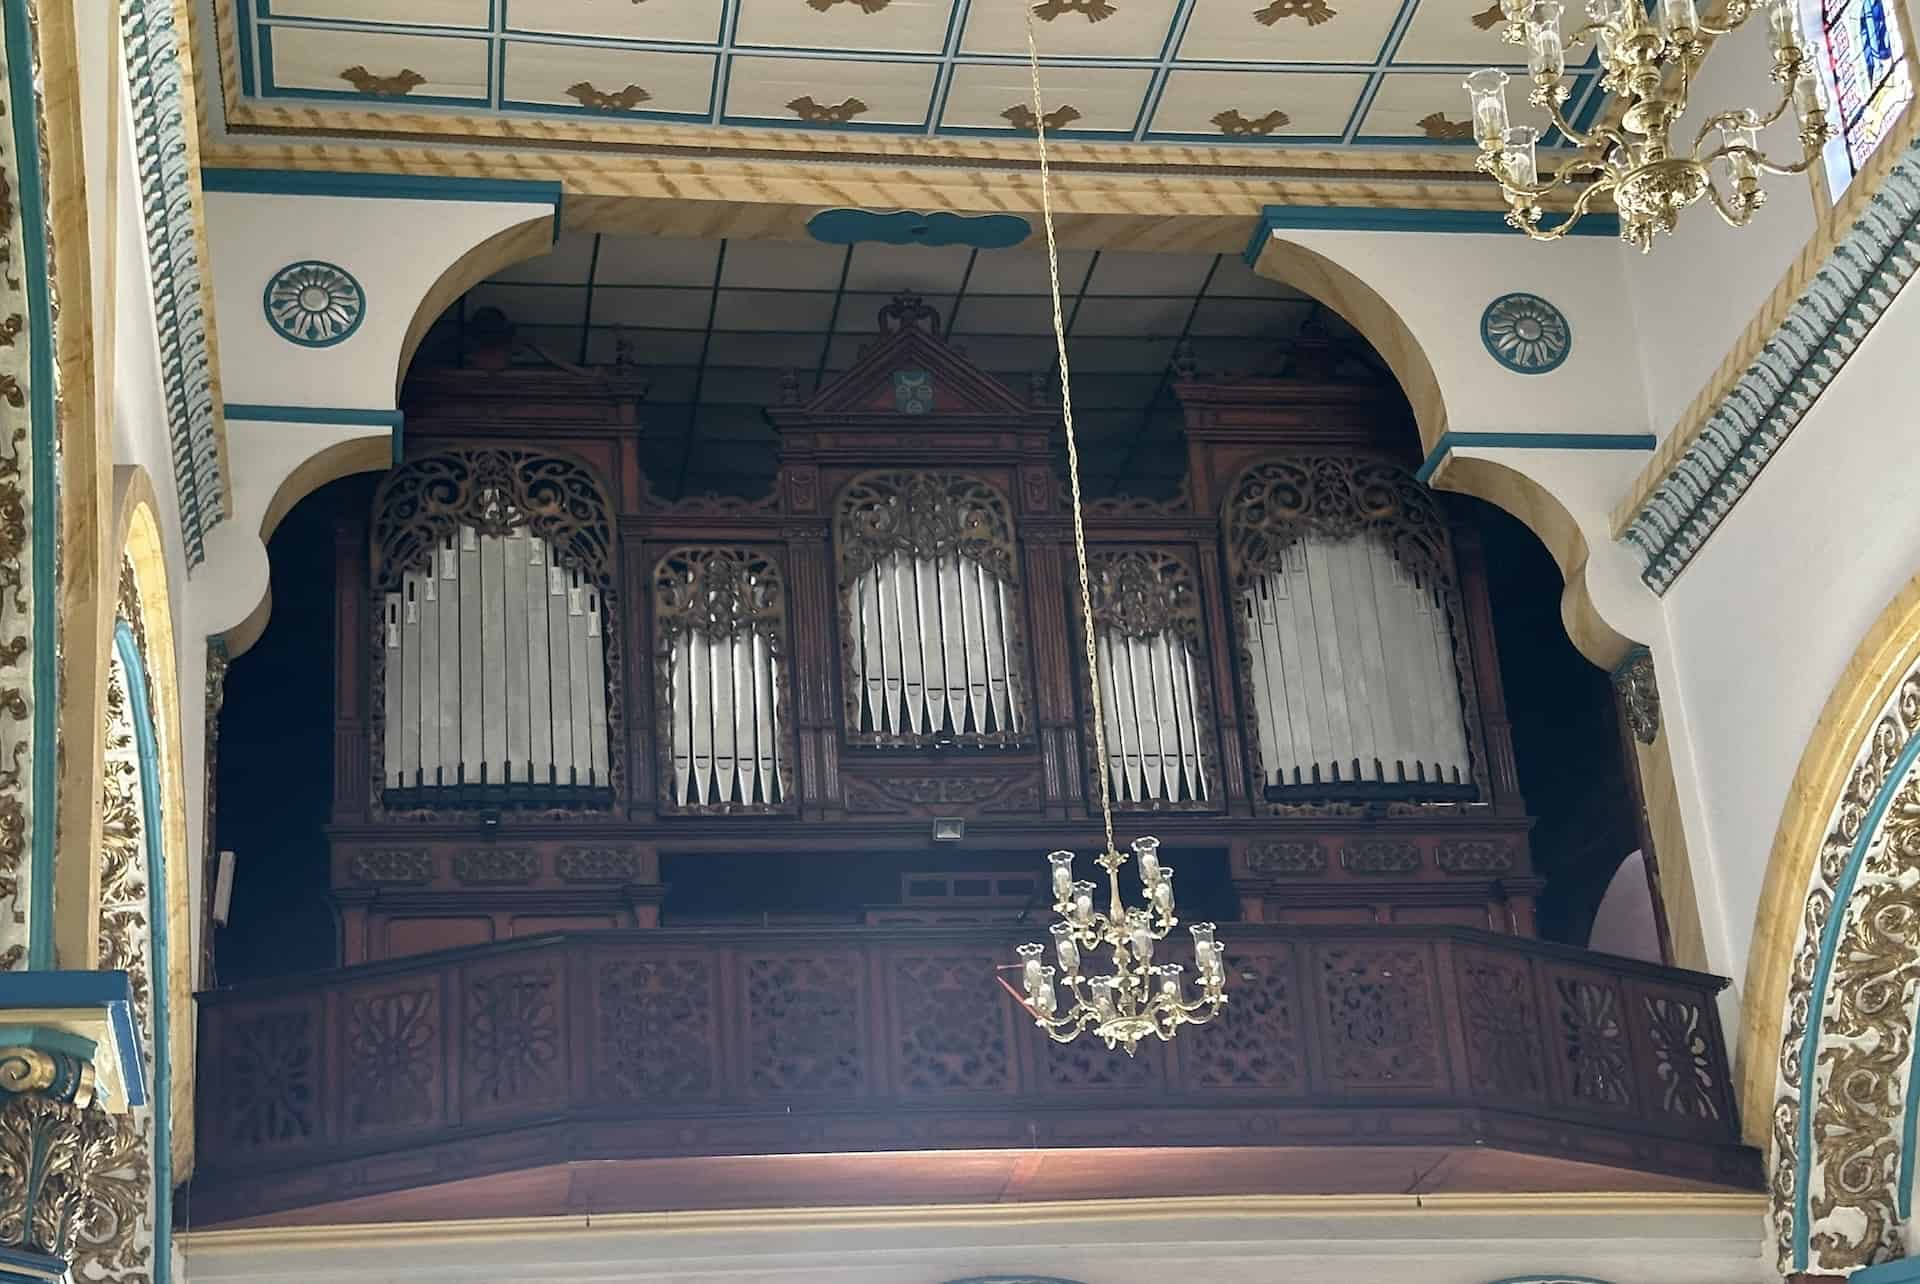 Organ of the Church of the Immaculate Conception